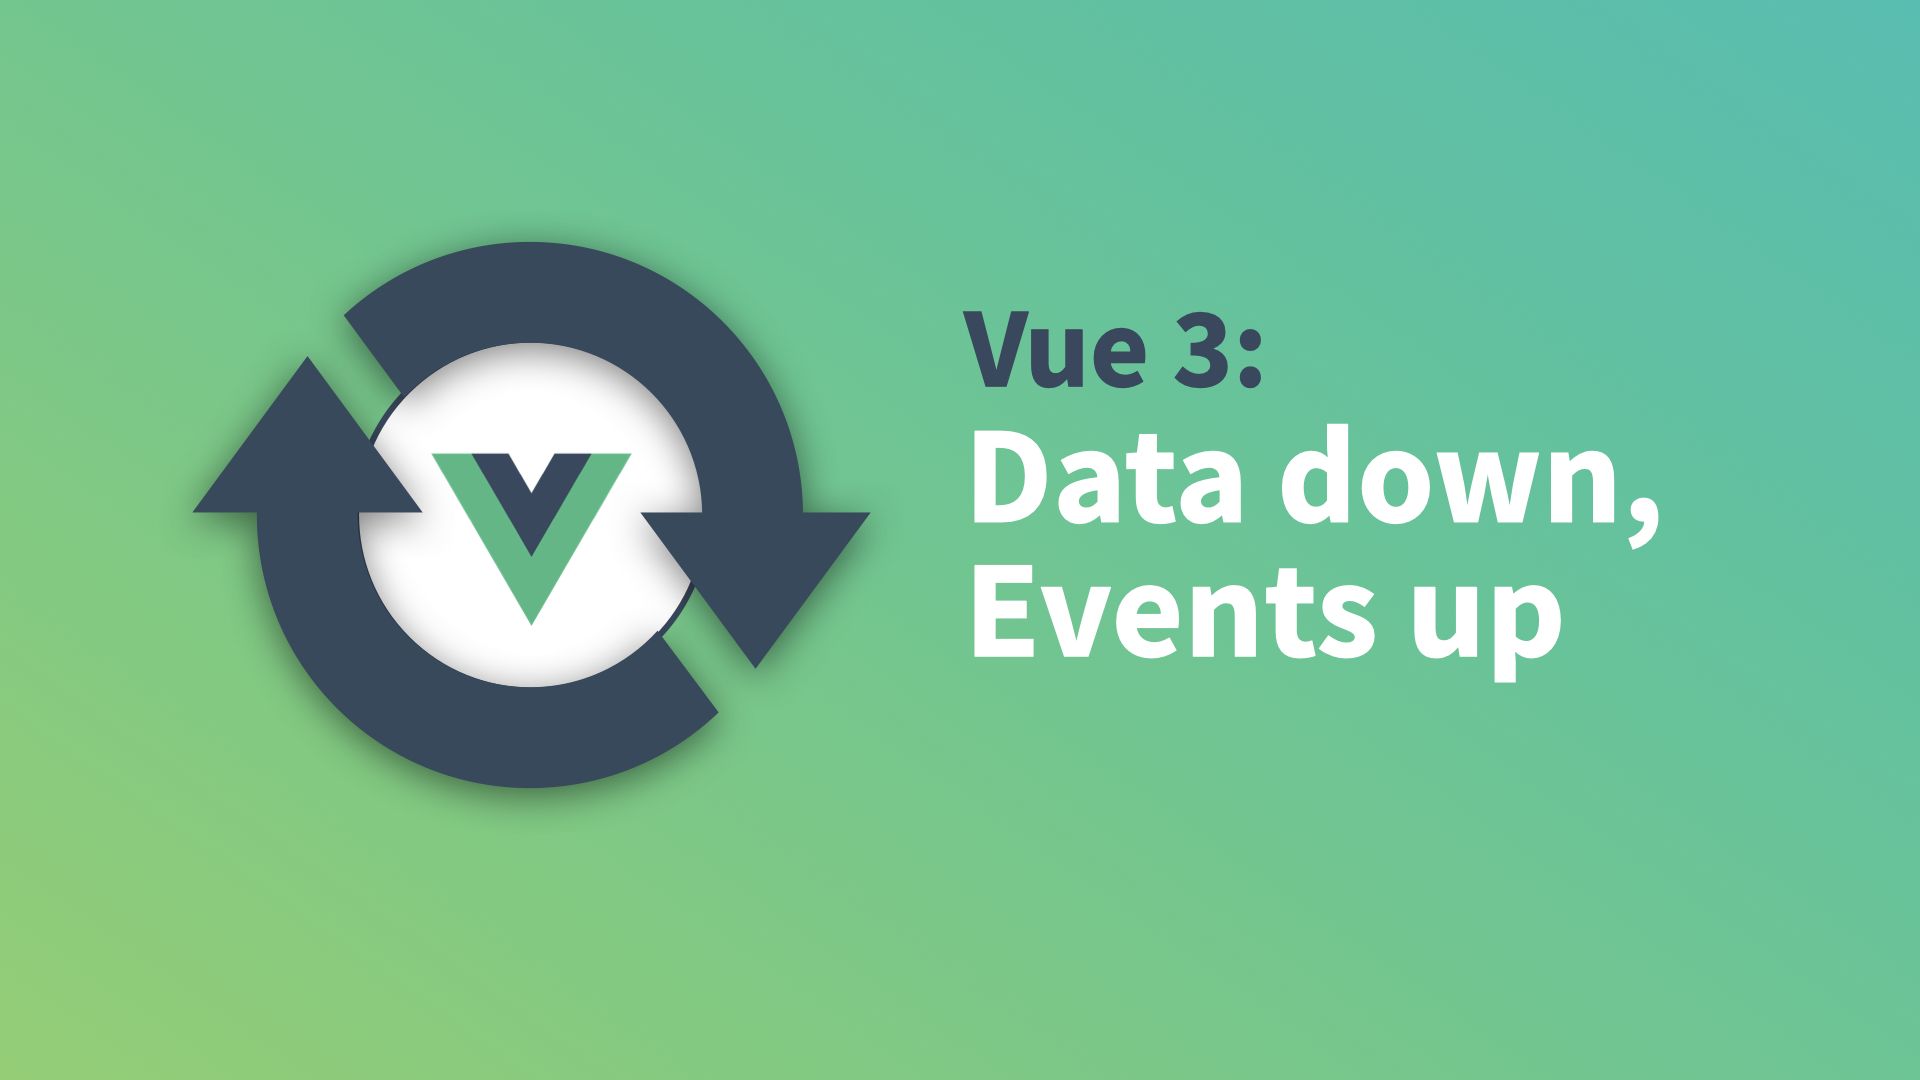 Vue 3: Data down, Events up